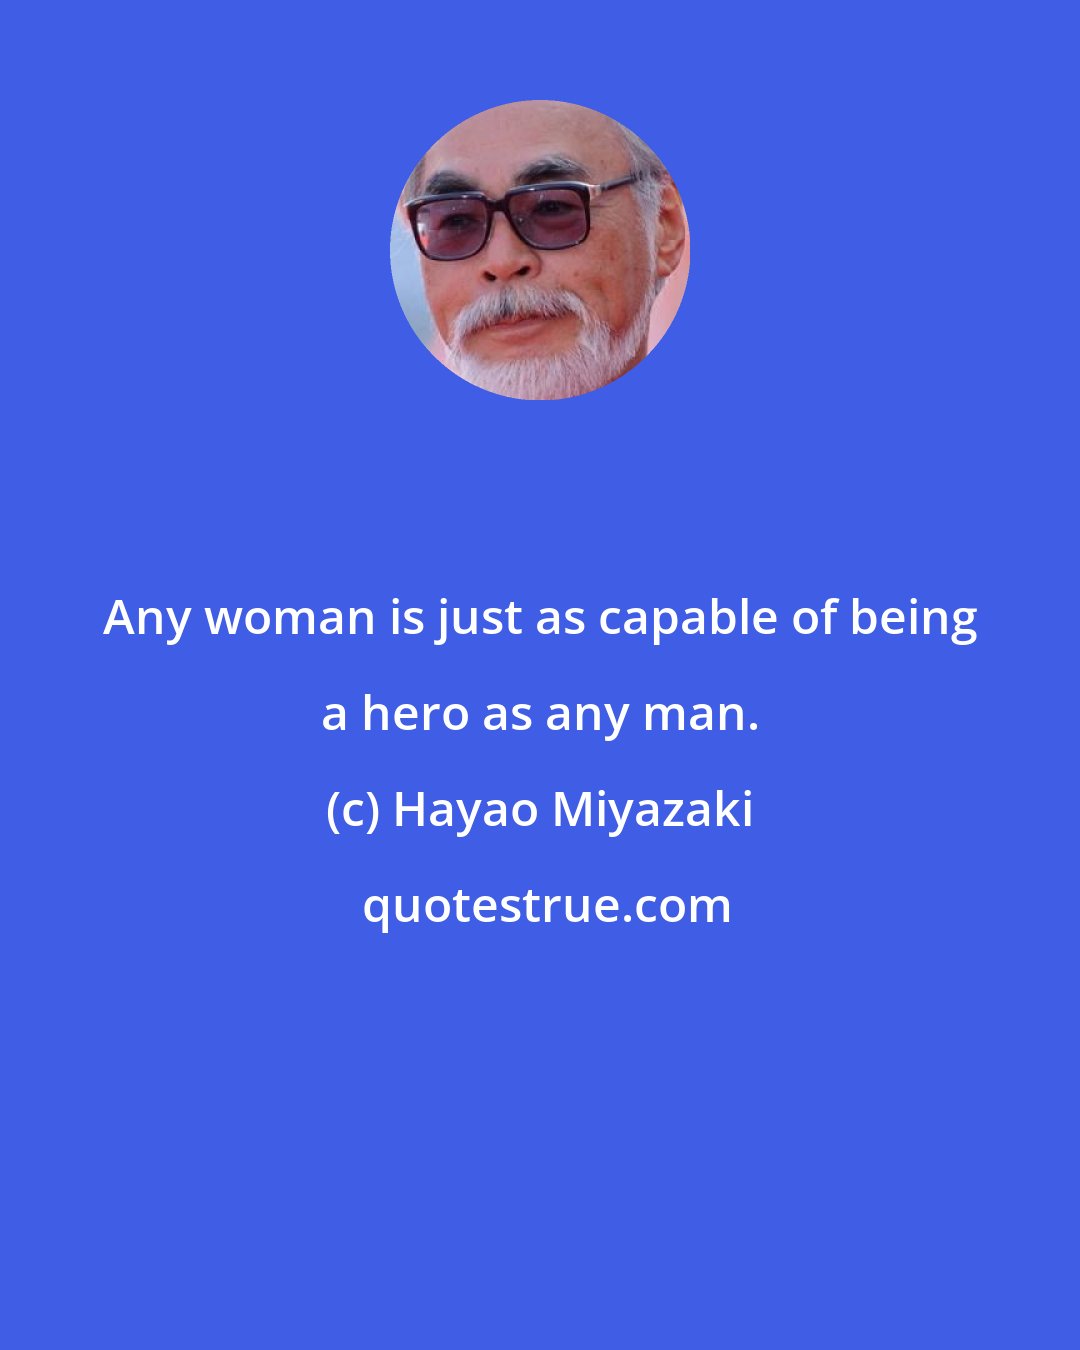 Hayao Miyazaki: Any woman is just as capable of being a hero as any man.